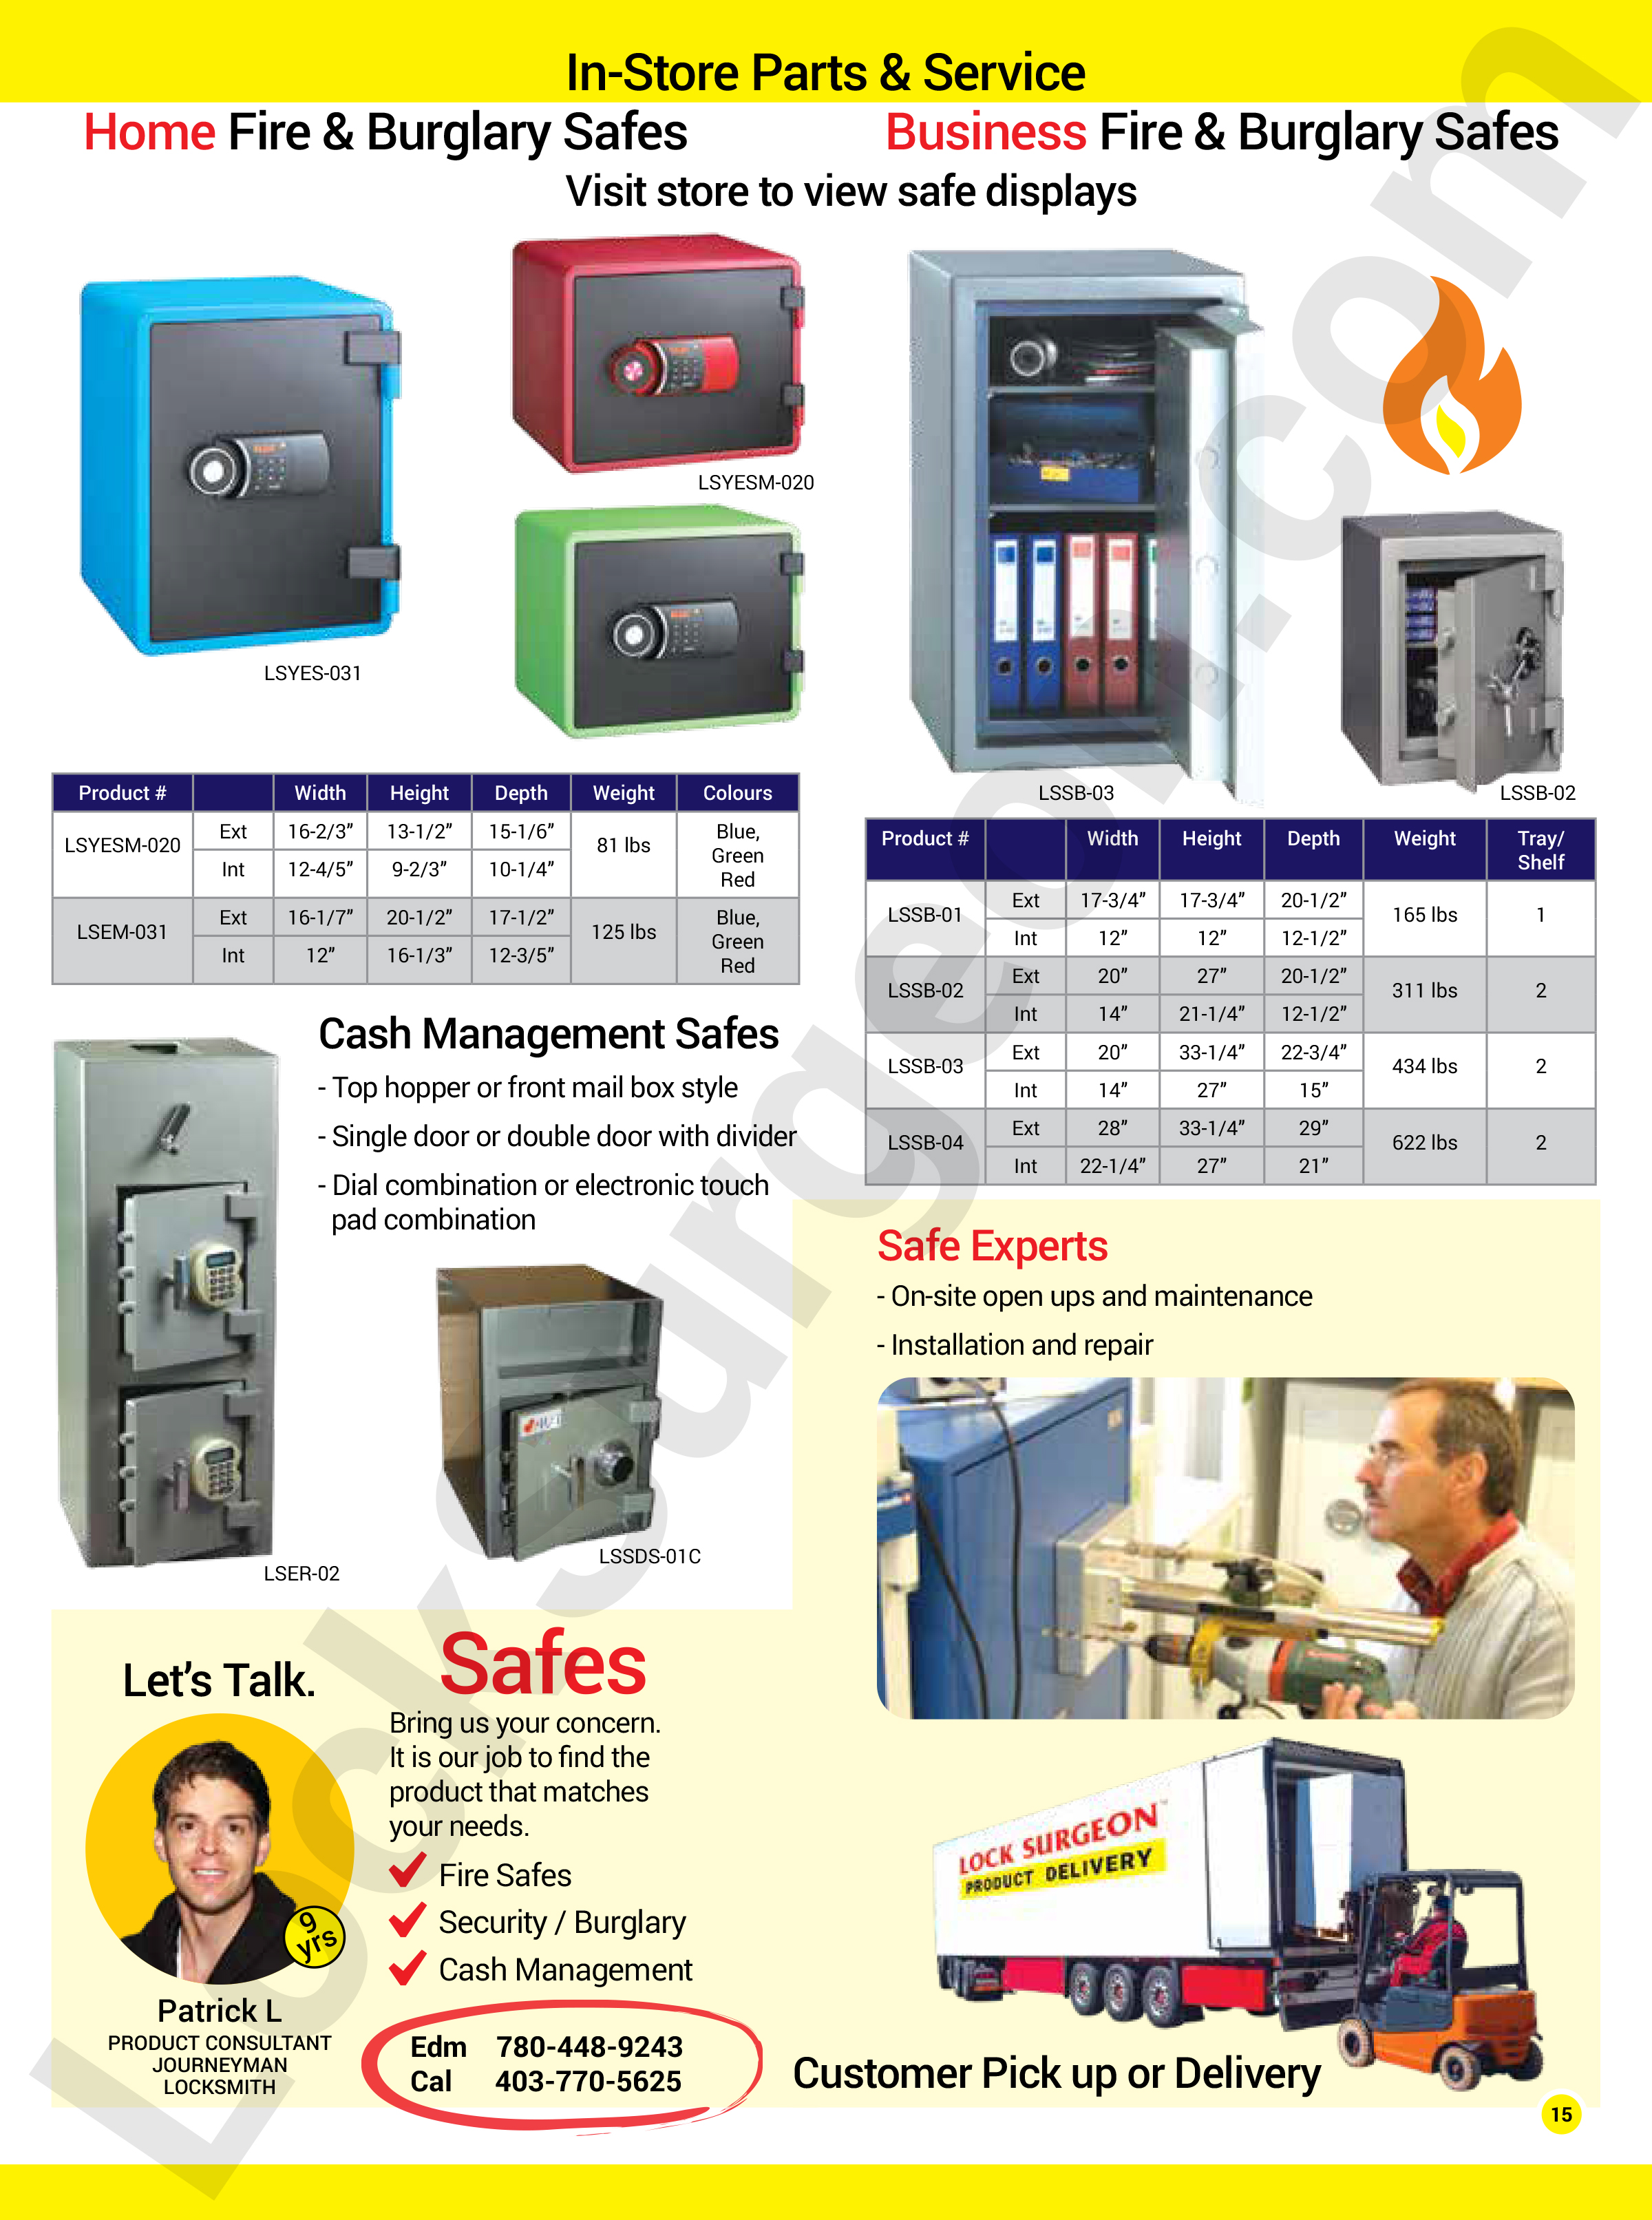 Fire & burglary safes, variety of sizes for residential or commercial use. Along with safe repair.